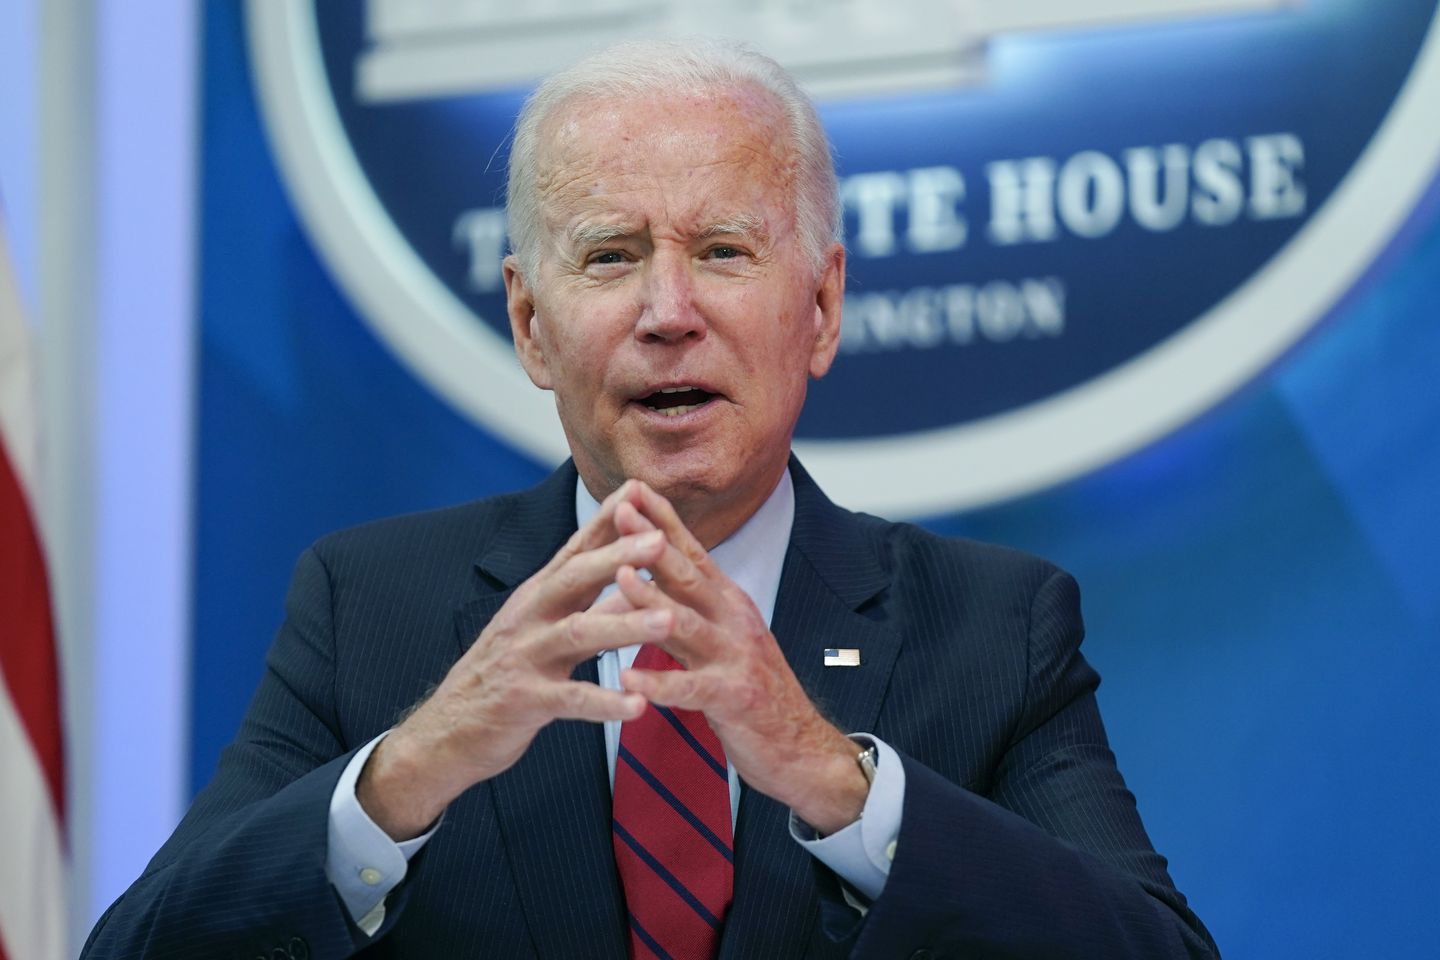 Progressives are divided over whether to hold Biden accountable or block GOP ascendance